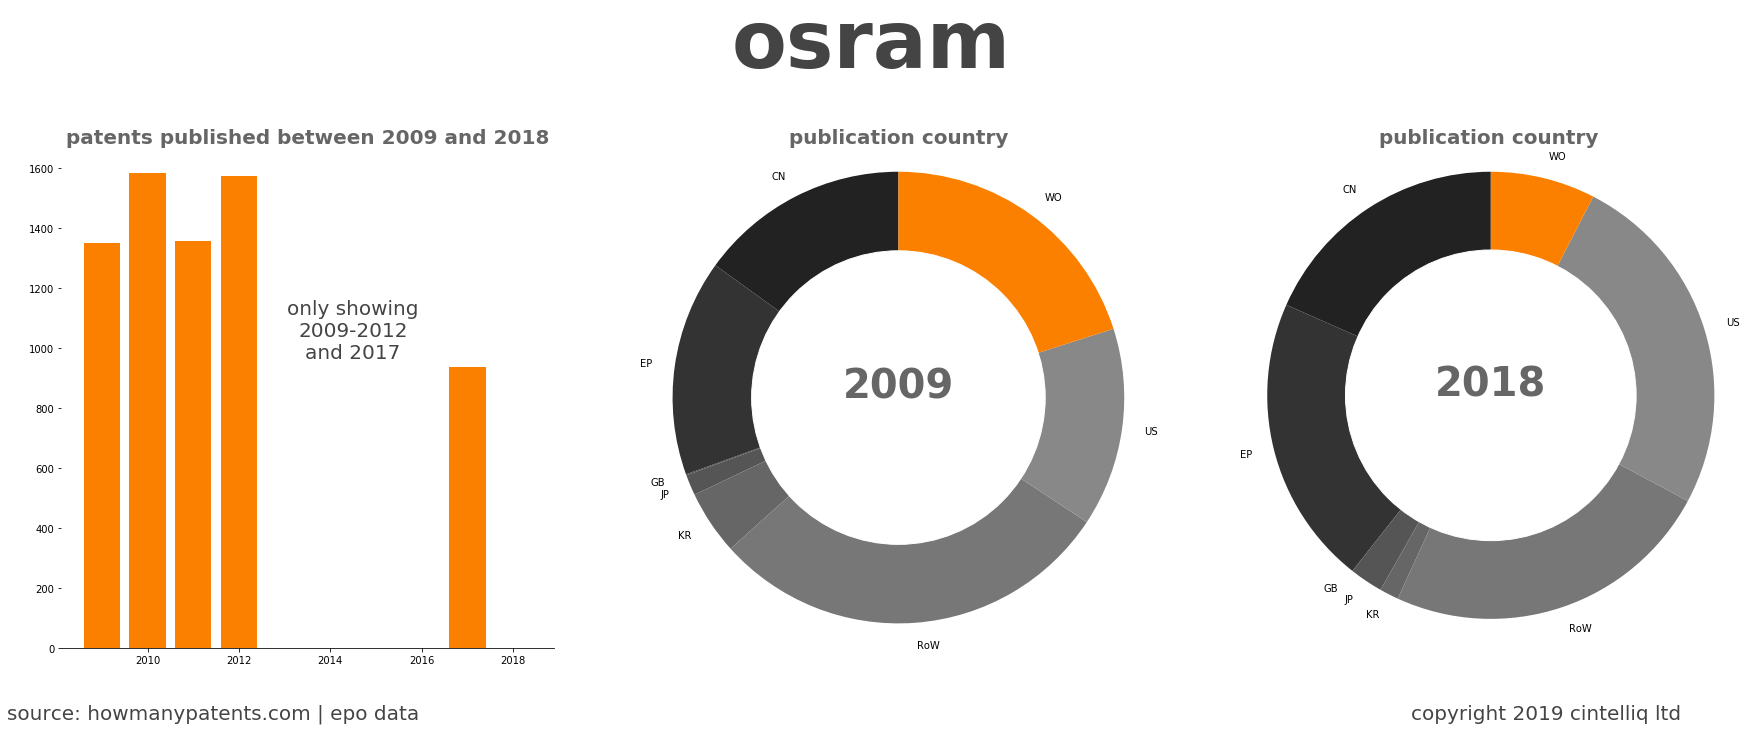 summary of patents for Osram